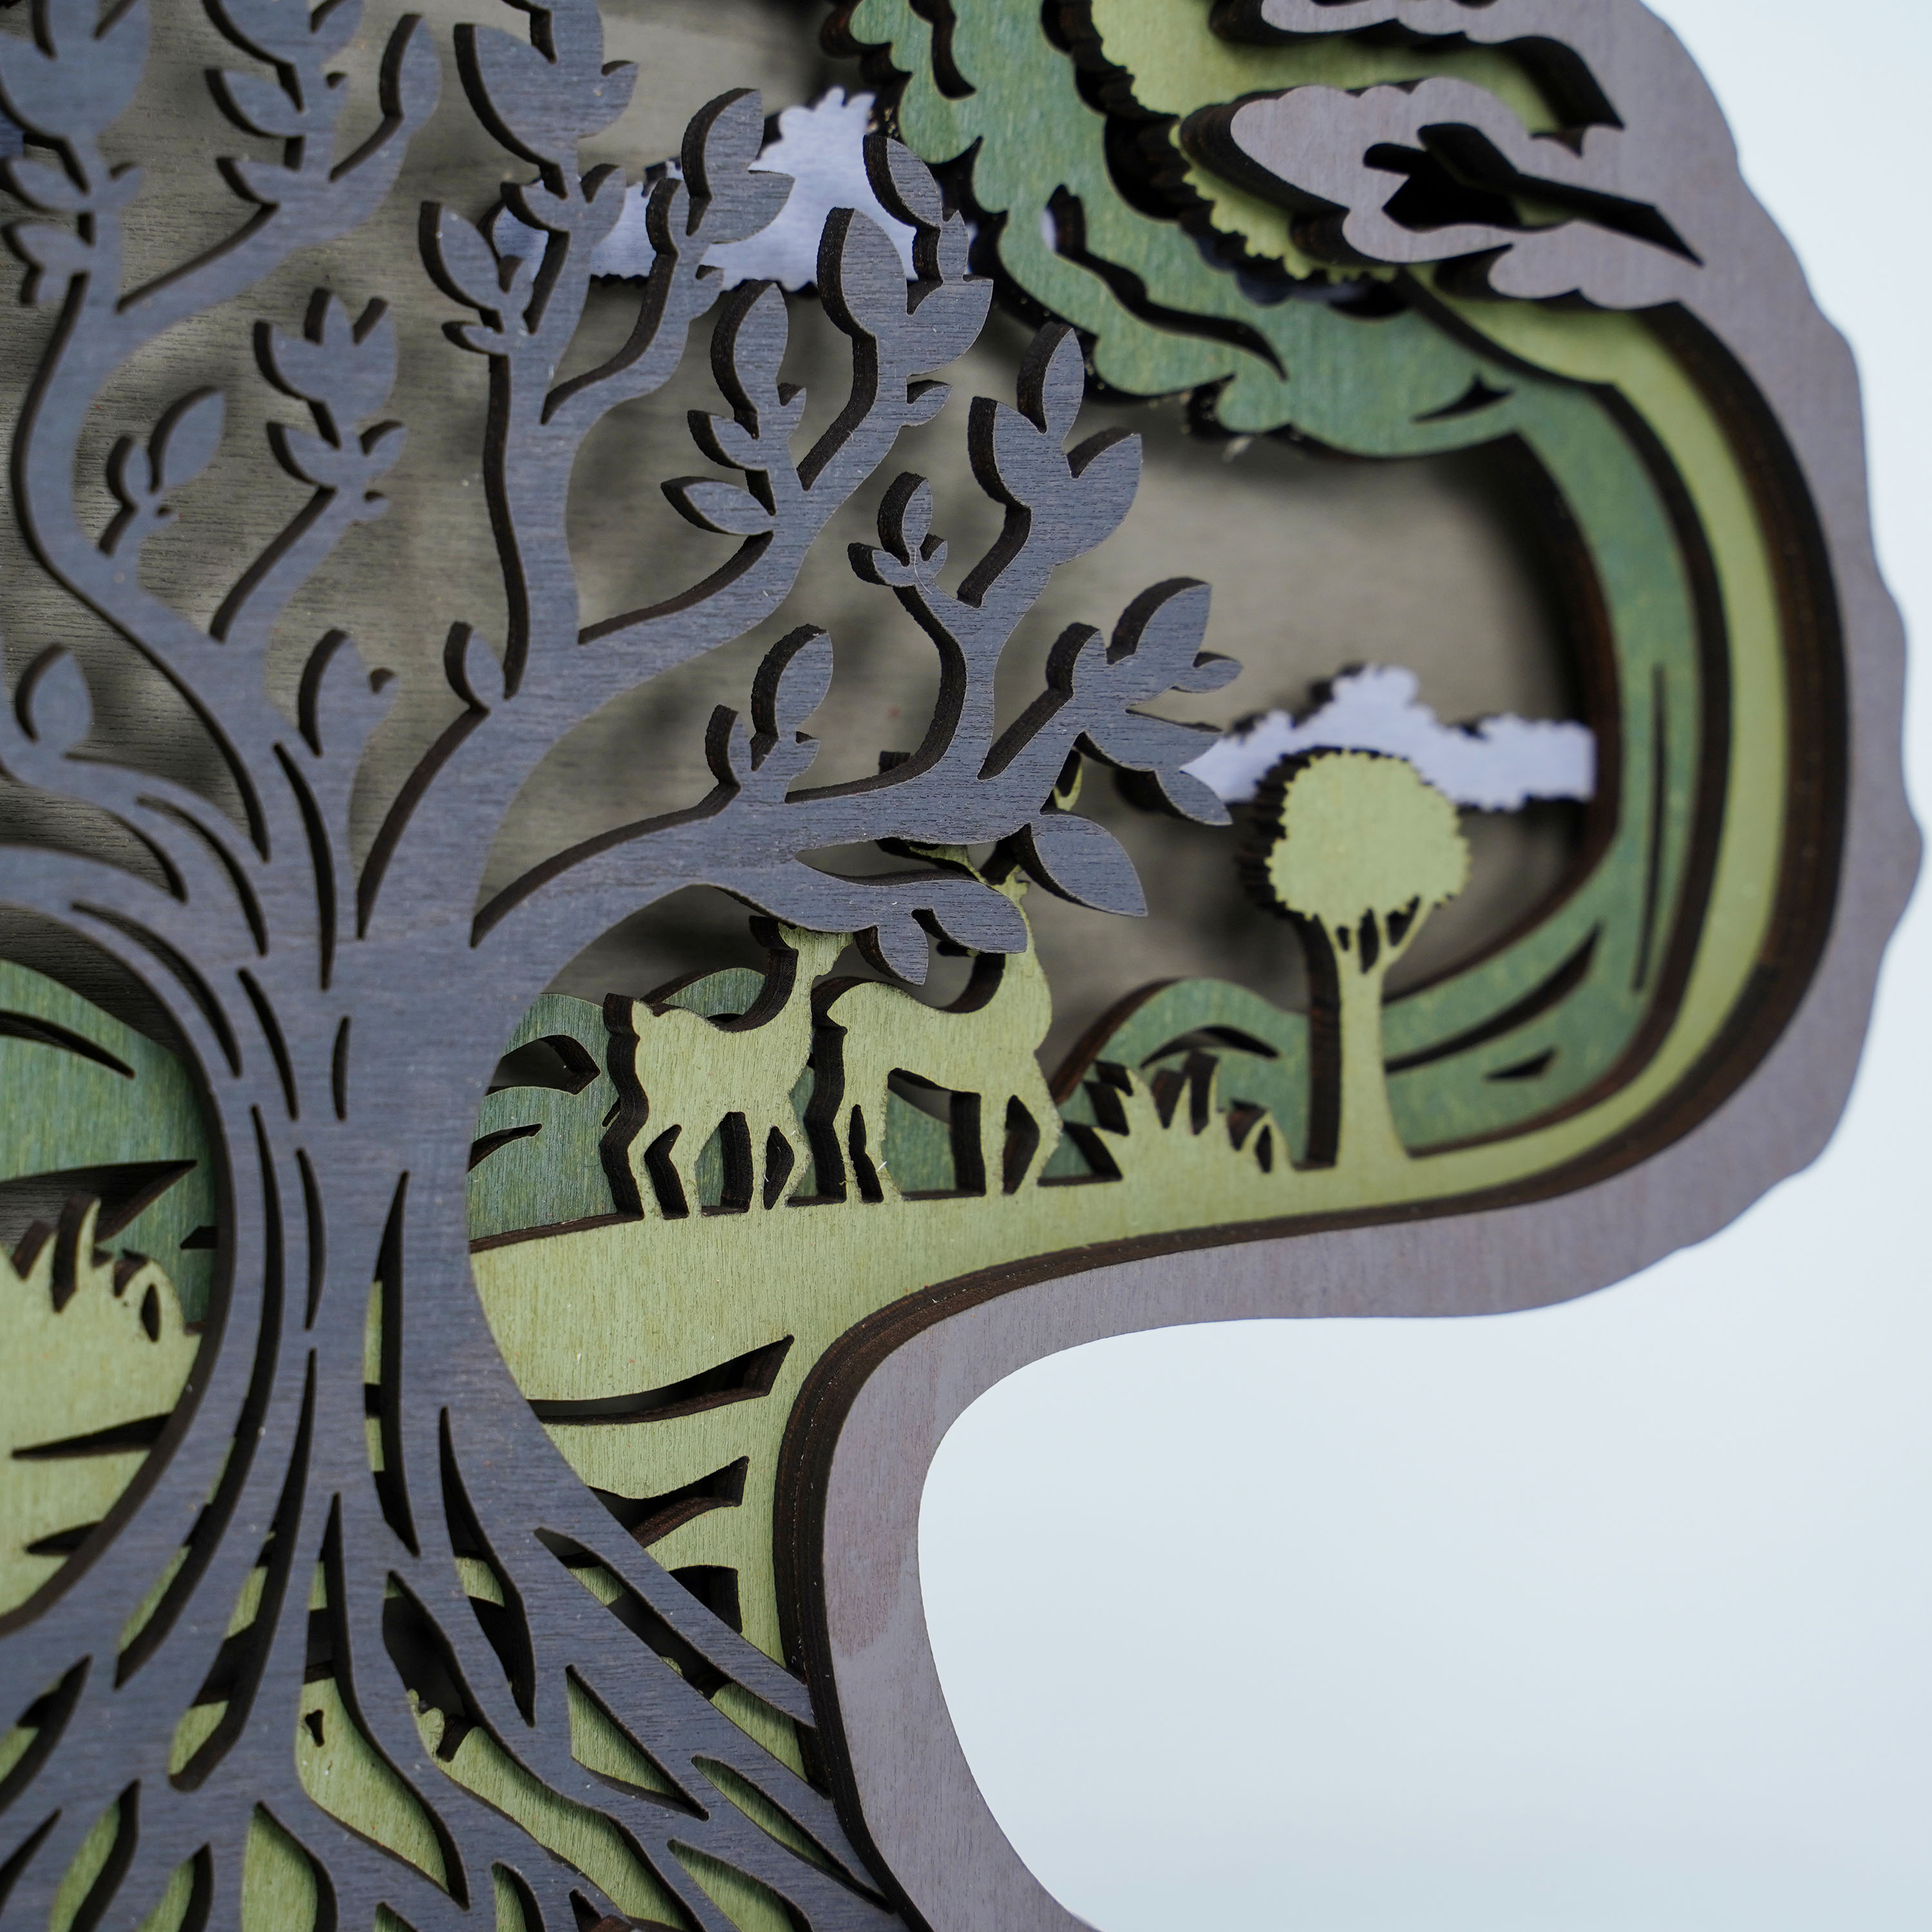 Tree Of Life 3D Wood Statue Lamp with Voice Control and Remote Control